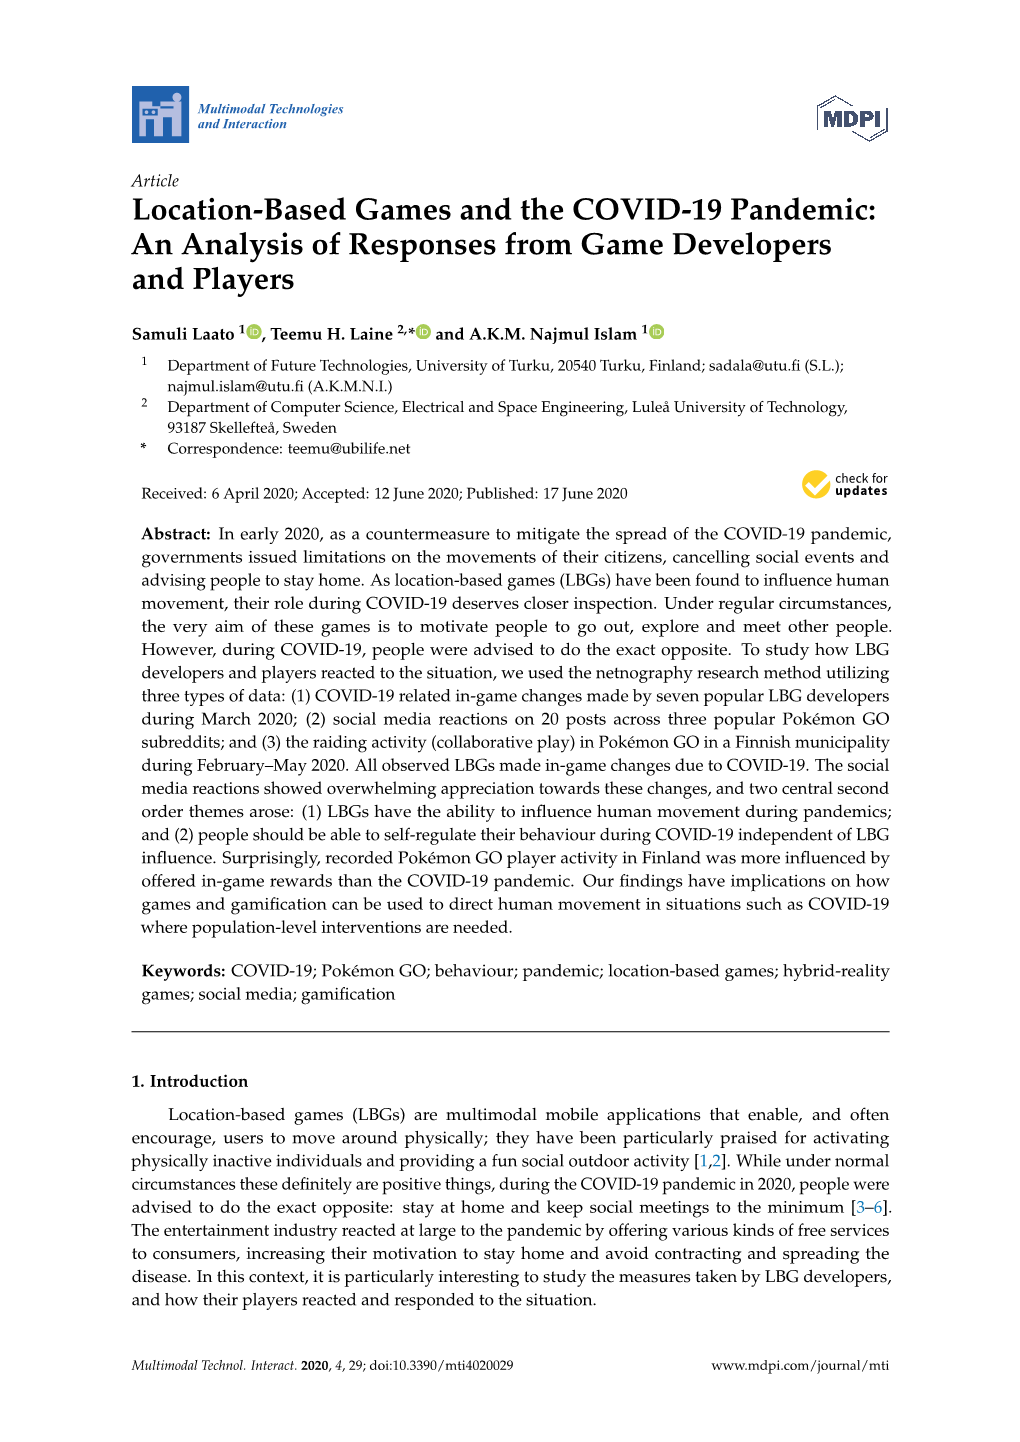 Location-Based Games and the COVID-19 Pandemic: an Analysis of Responses from Game Developers and Players